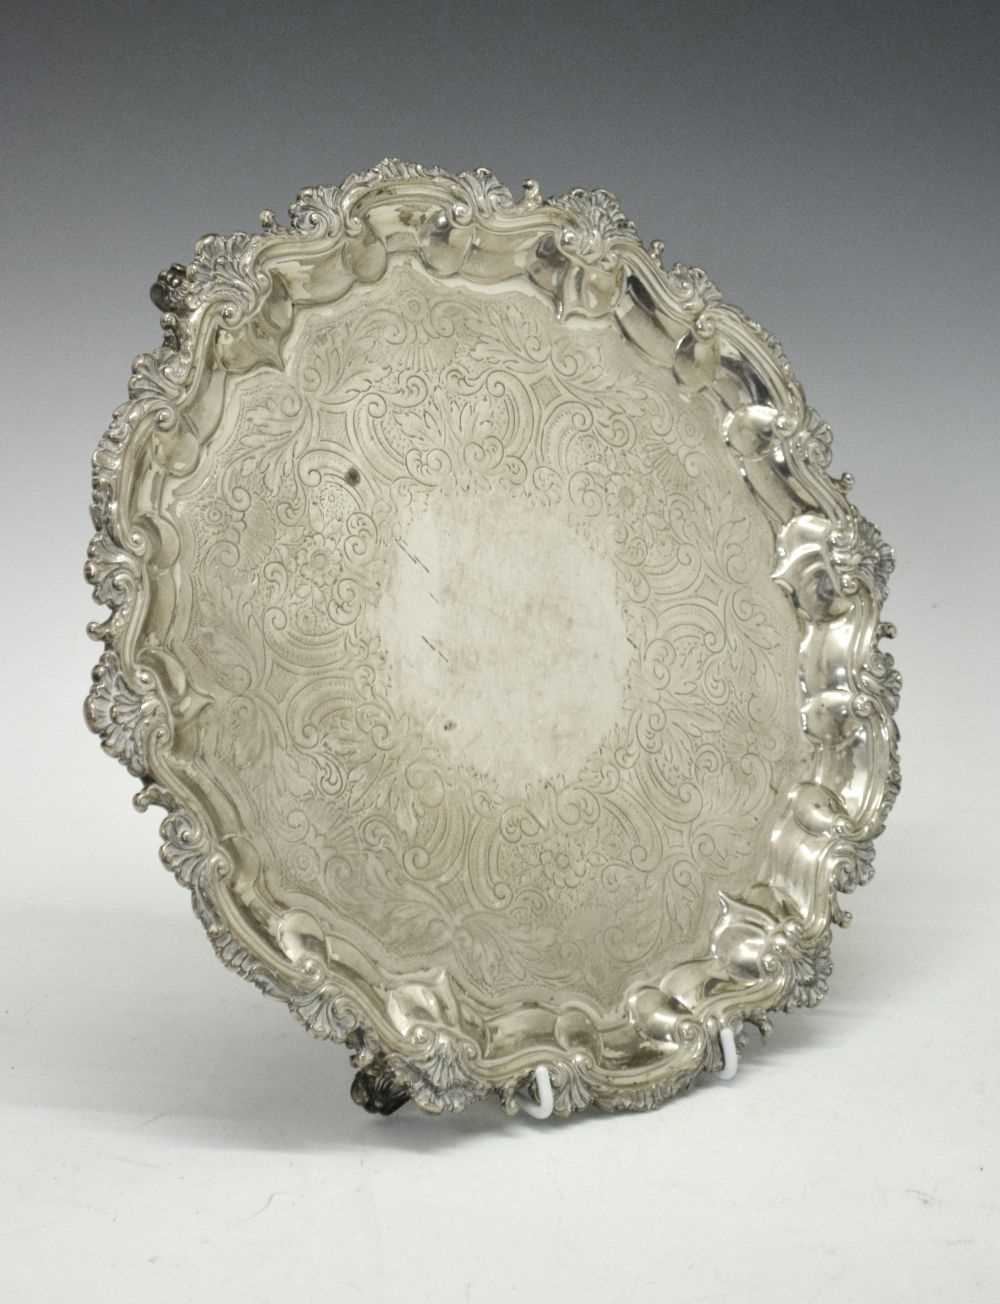 George III silver salver with raised acanthus leaf border